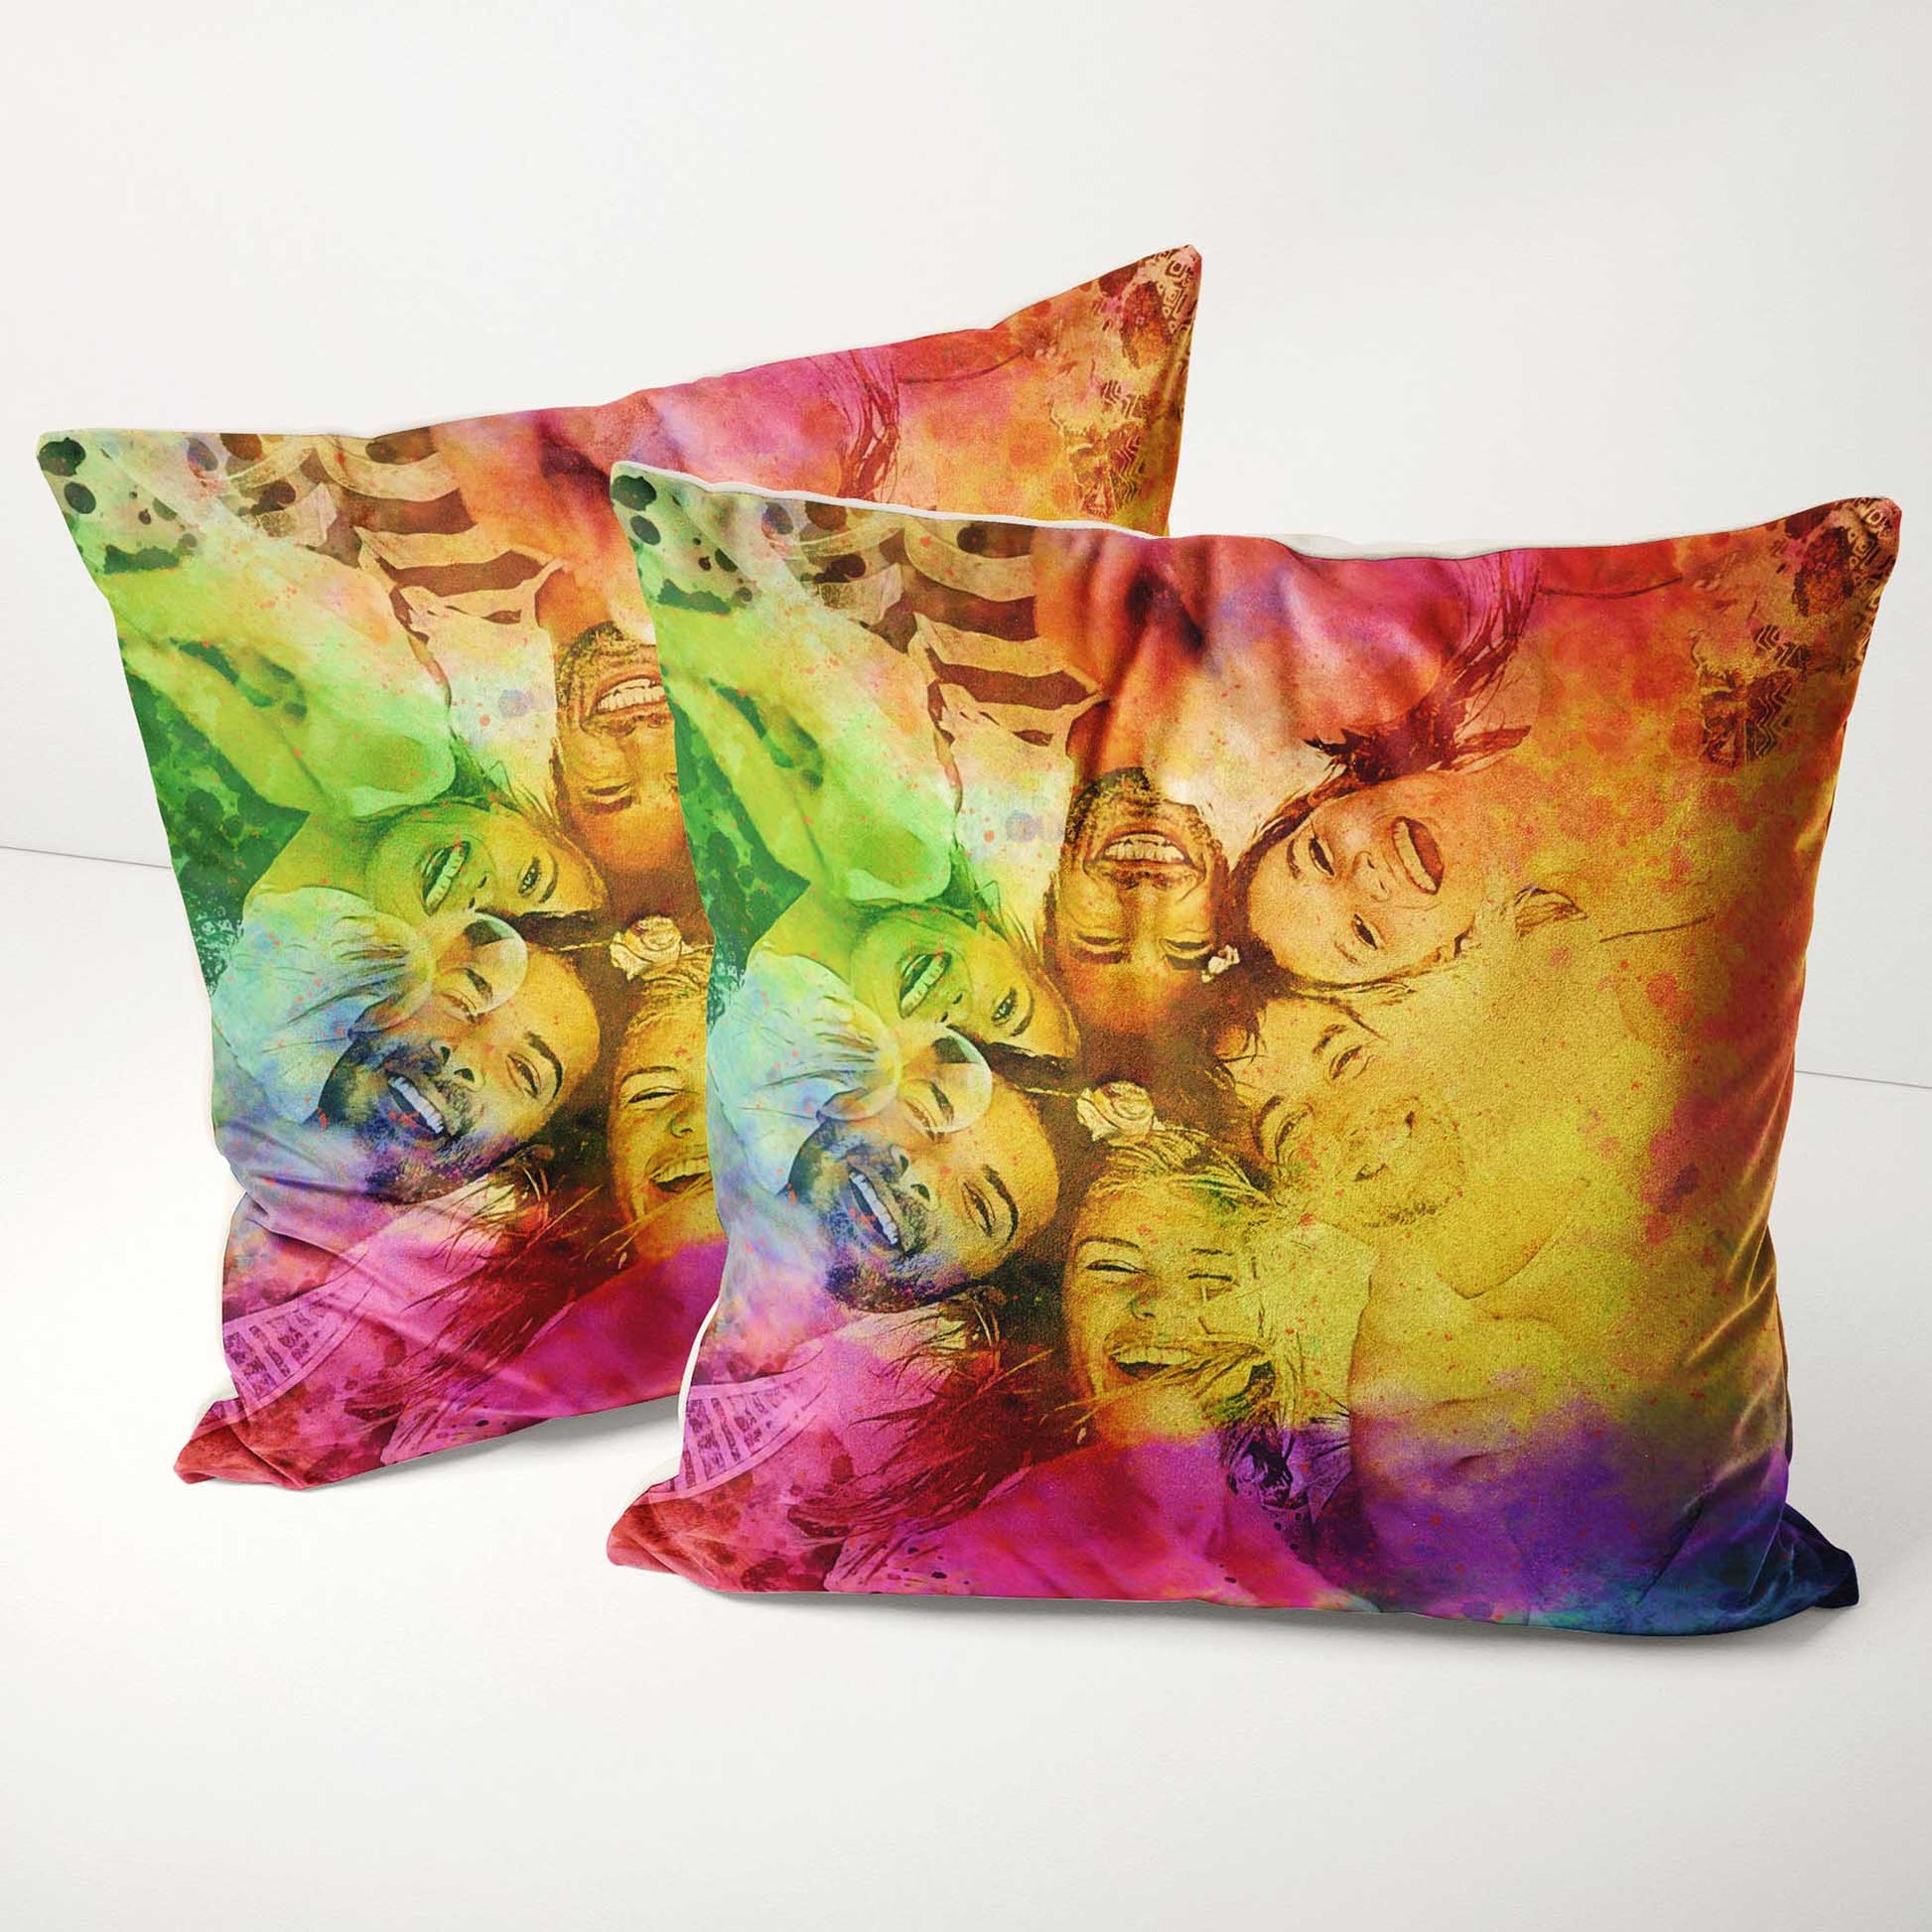 Unleash your imagination with the Personalised Splash of Colours Cushion. Its lively hues of green, yellow, purple, and pink create a mesmerizing display that brightens any room. Handcrafted from soft velvet